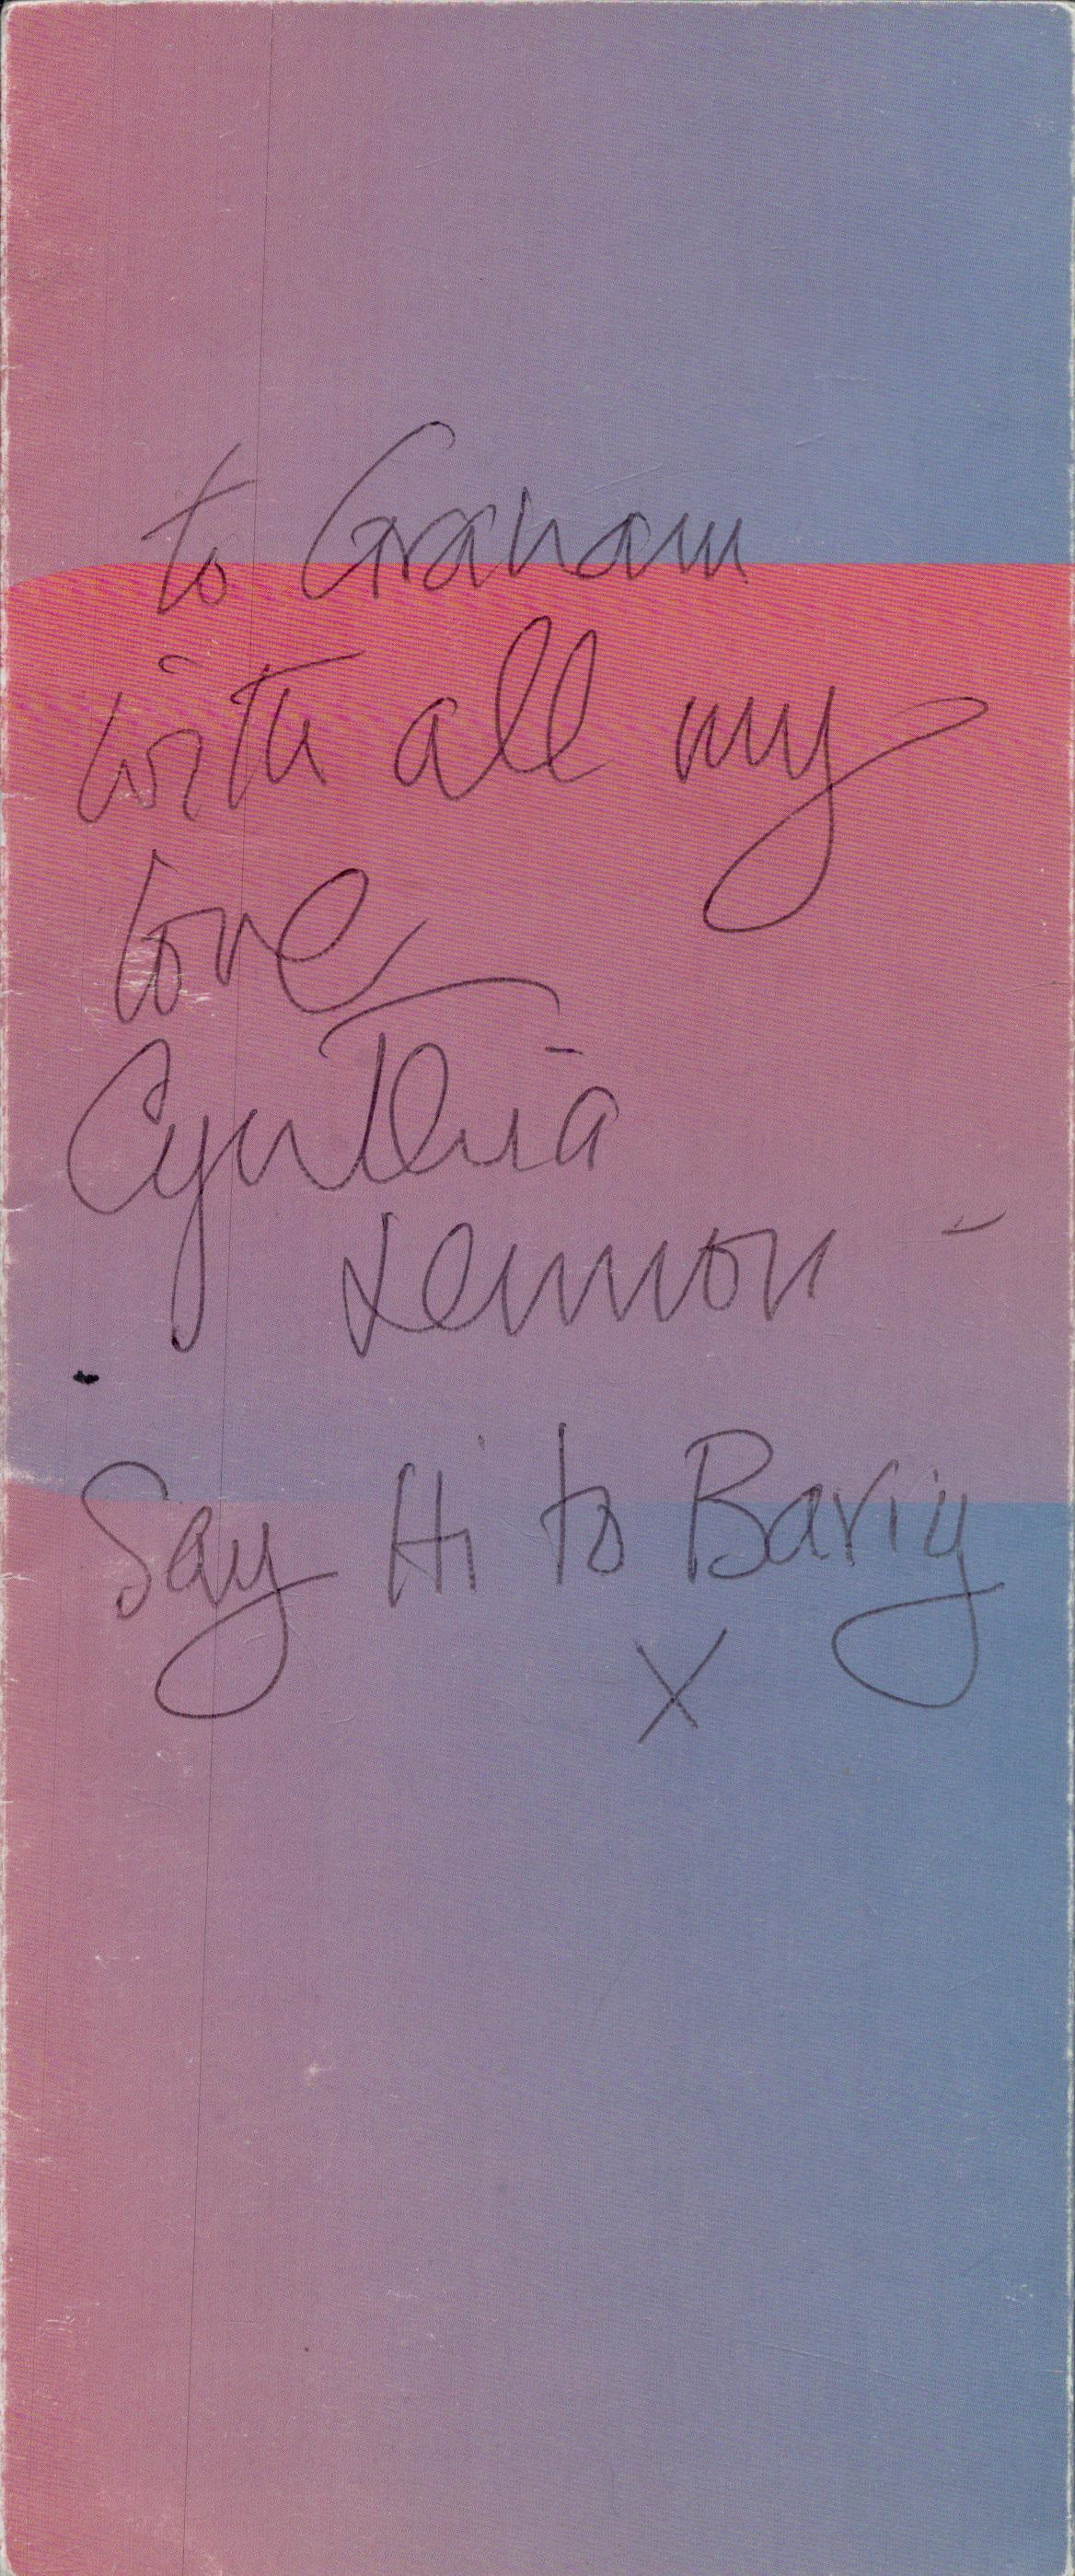 Cynthia Lennon signed Virgin Atlantic menu. Signed on outside cover of menu. Signature obtained from